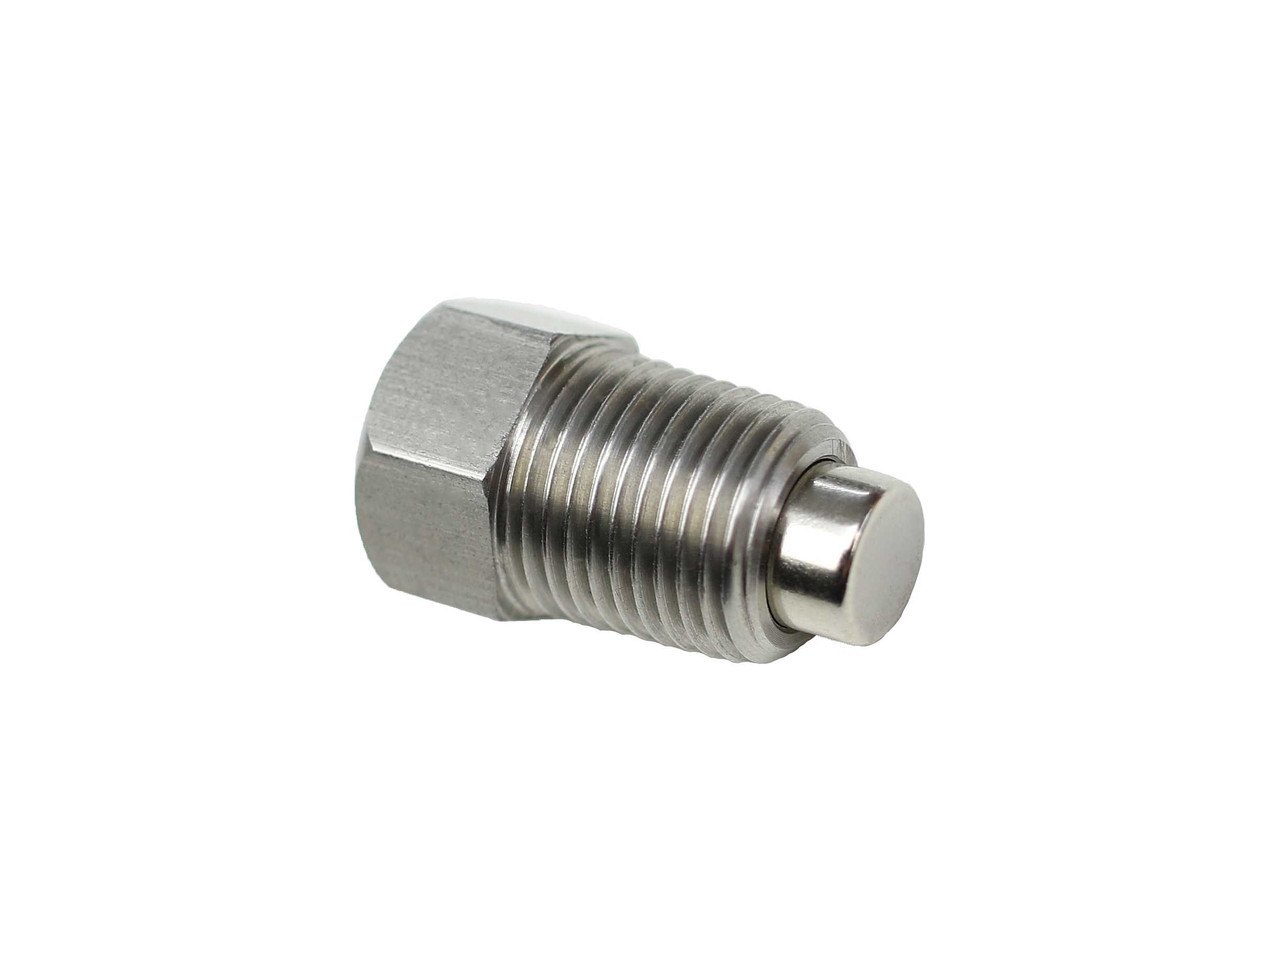 45830-48 for Harley Davidson - Stainless Steel Magnetic Oil Drain Plug with Neodymium Magnet - Made In USA